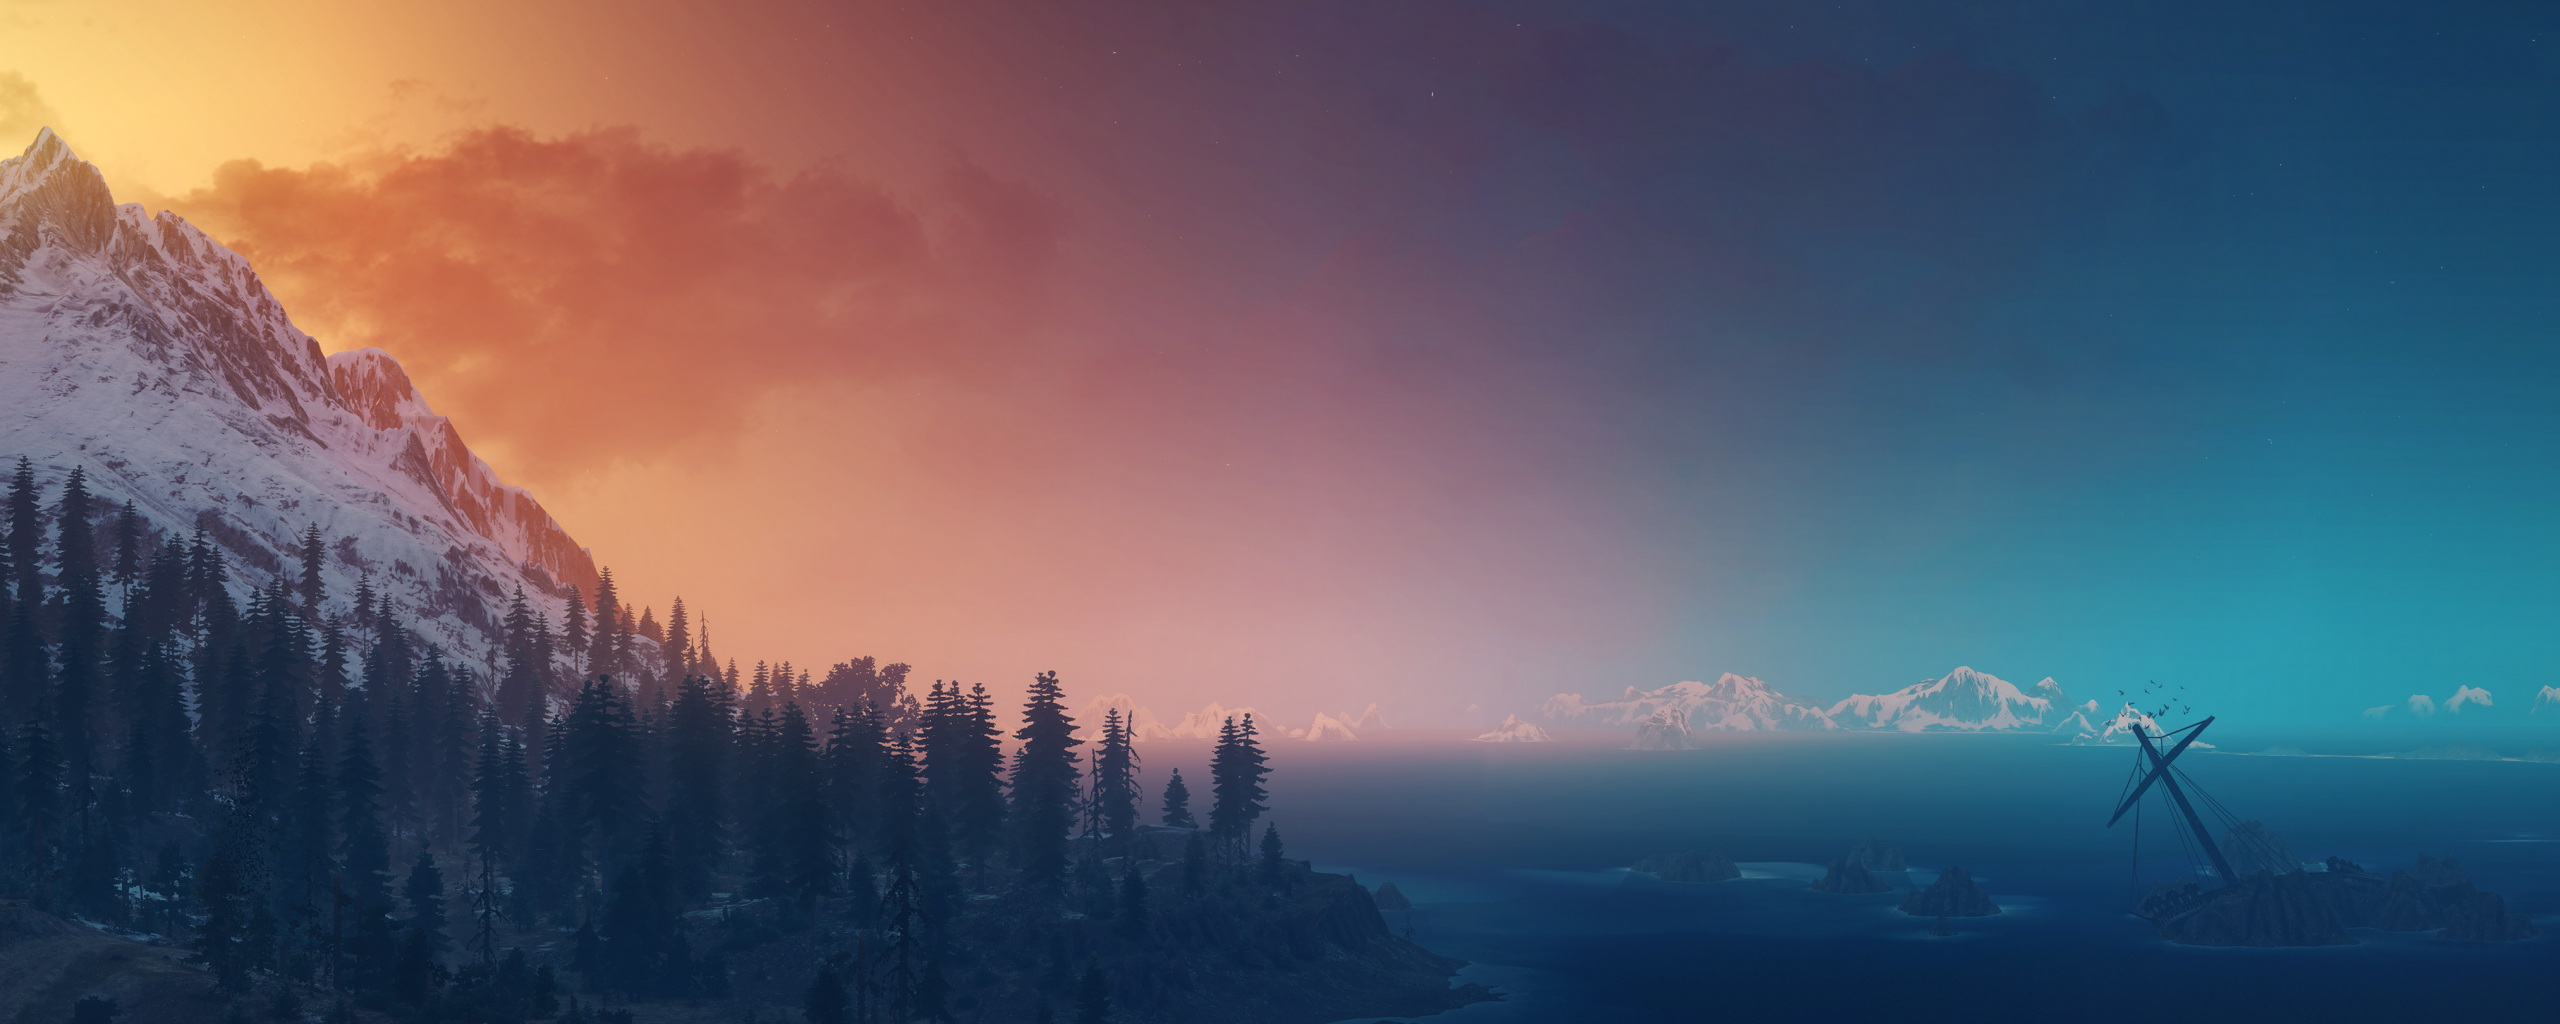 The Witcher 3: Wild Hunt, landscape, panorama, sky, 2560x1024 wallpaper